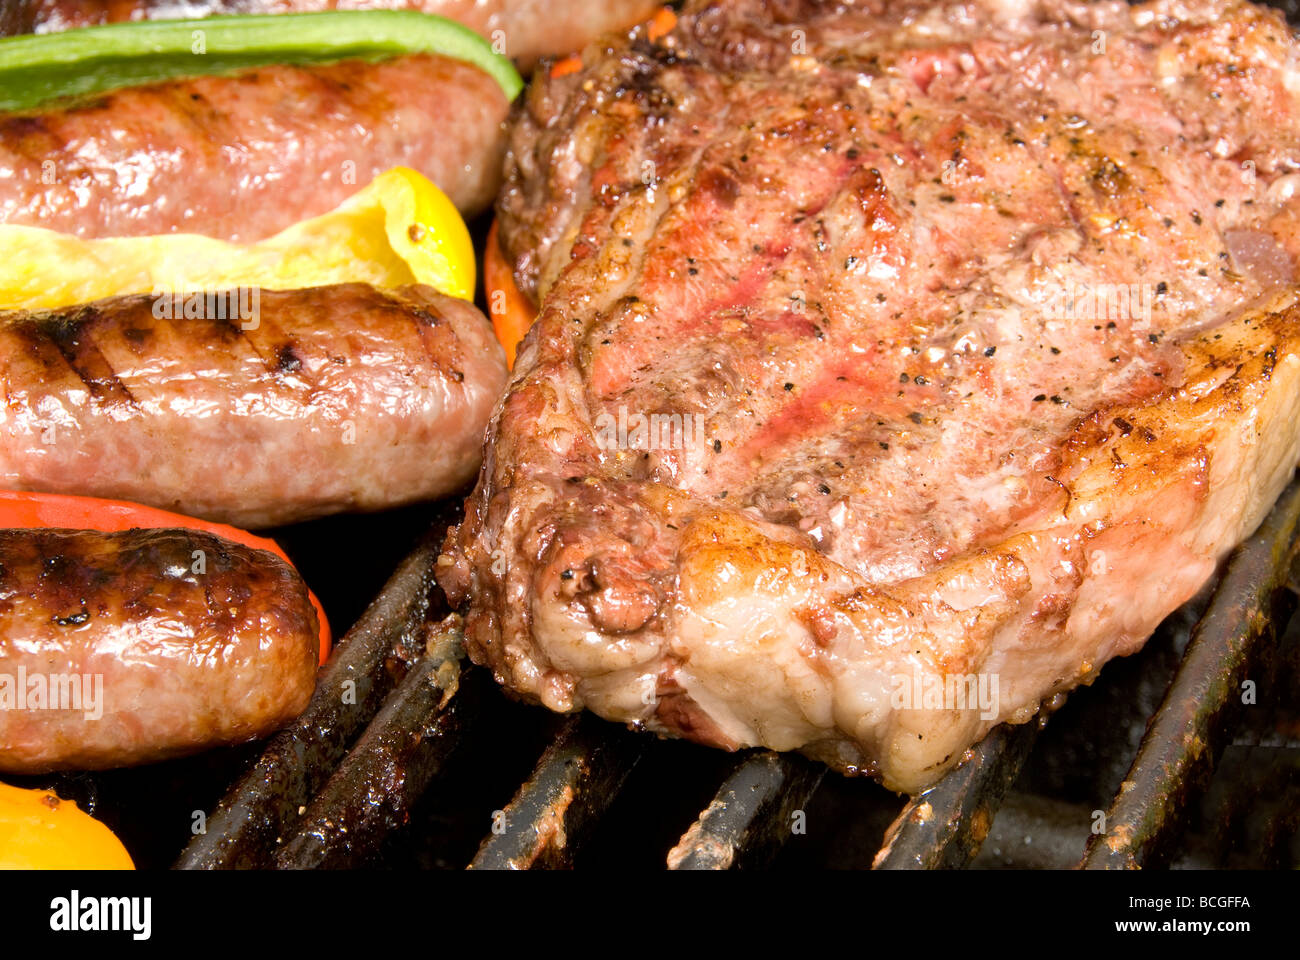 Steak and bratwurst cooming on a barbecue with bell peppers as a season and garnish Stock Photo